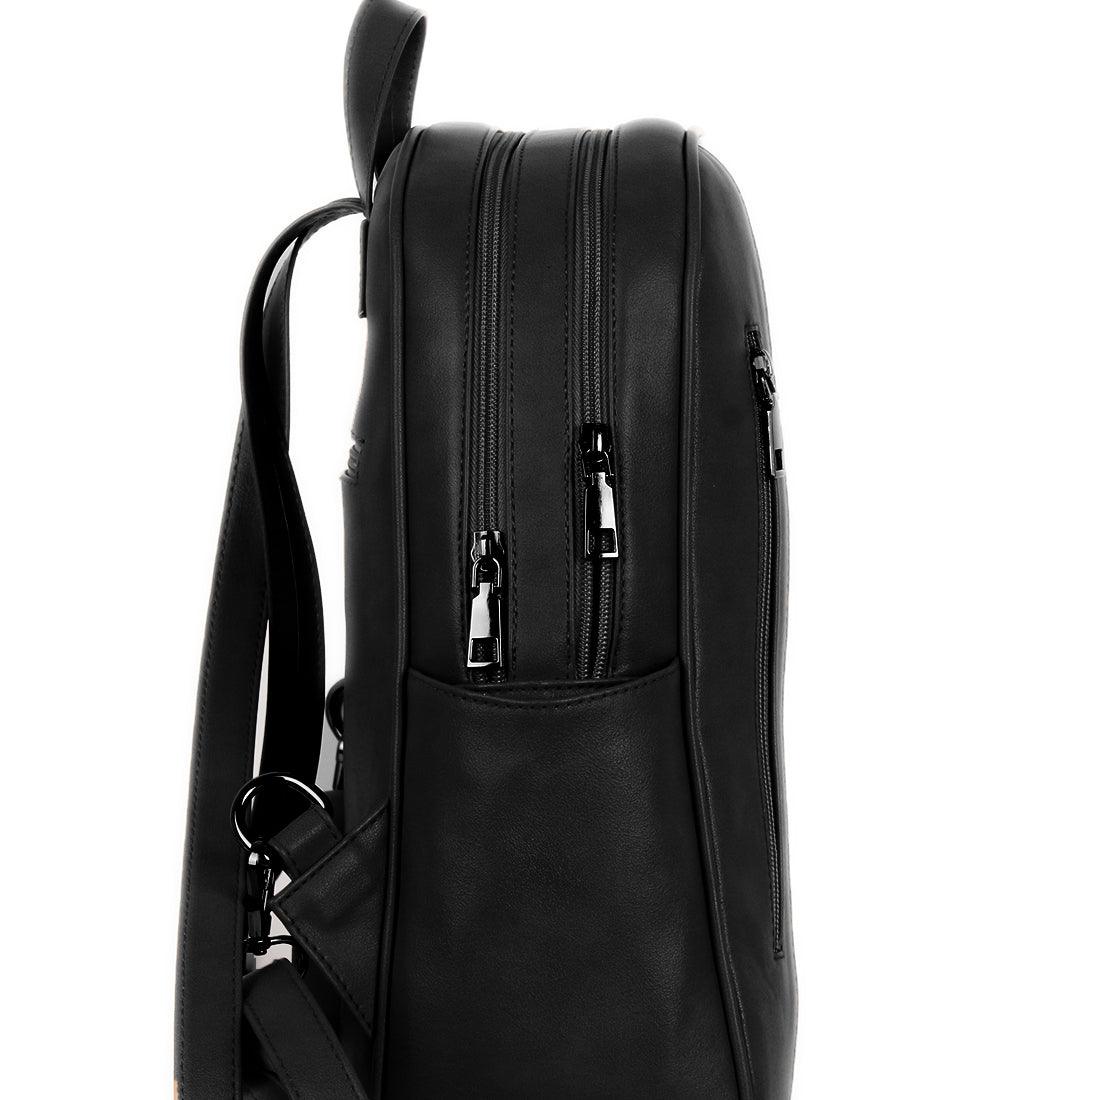 Black Mixed Backpack Do you even space - CANVAEGYPT